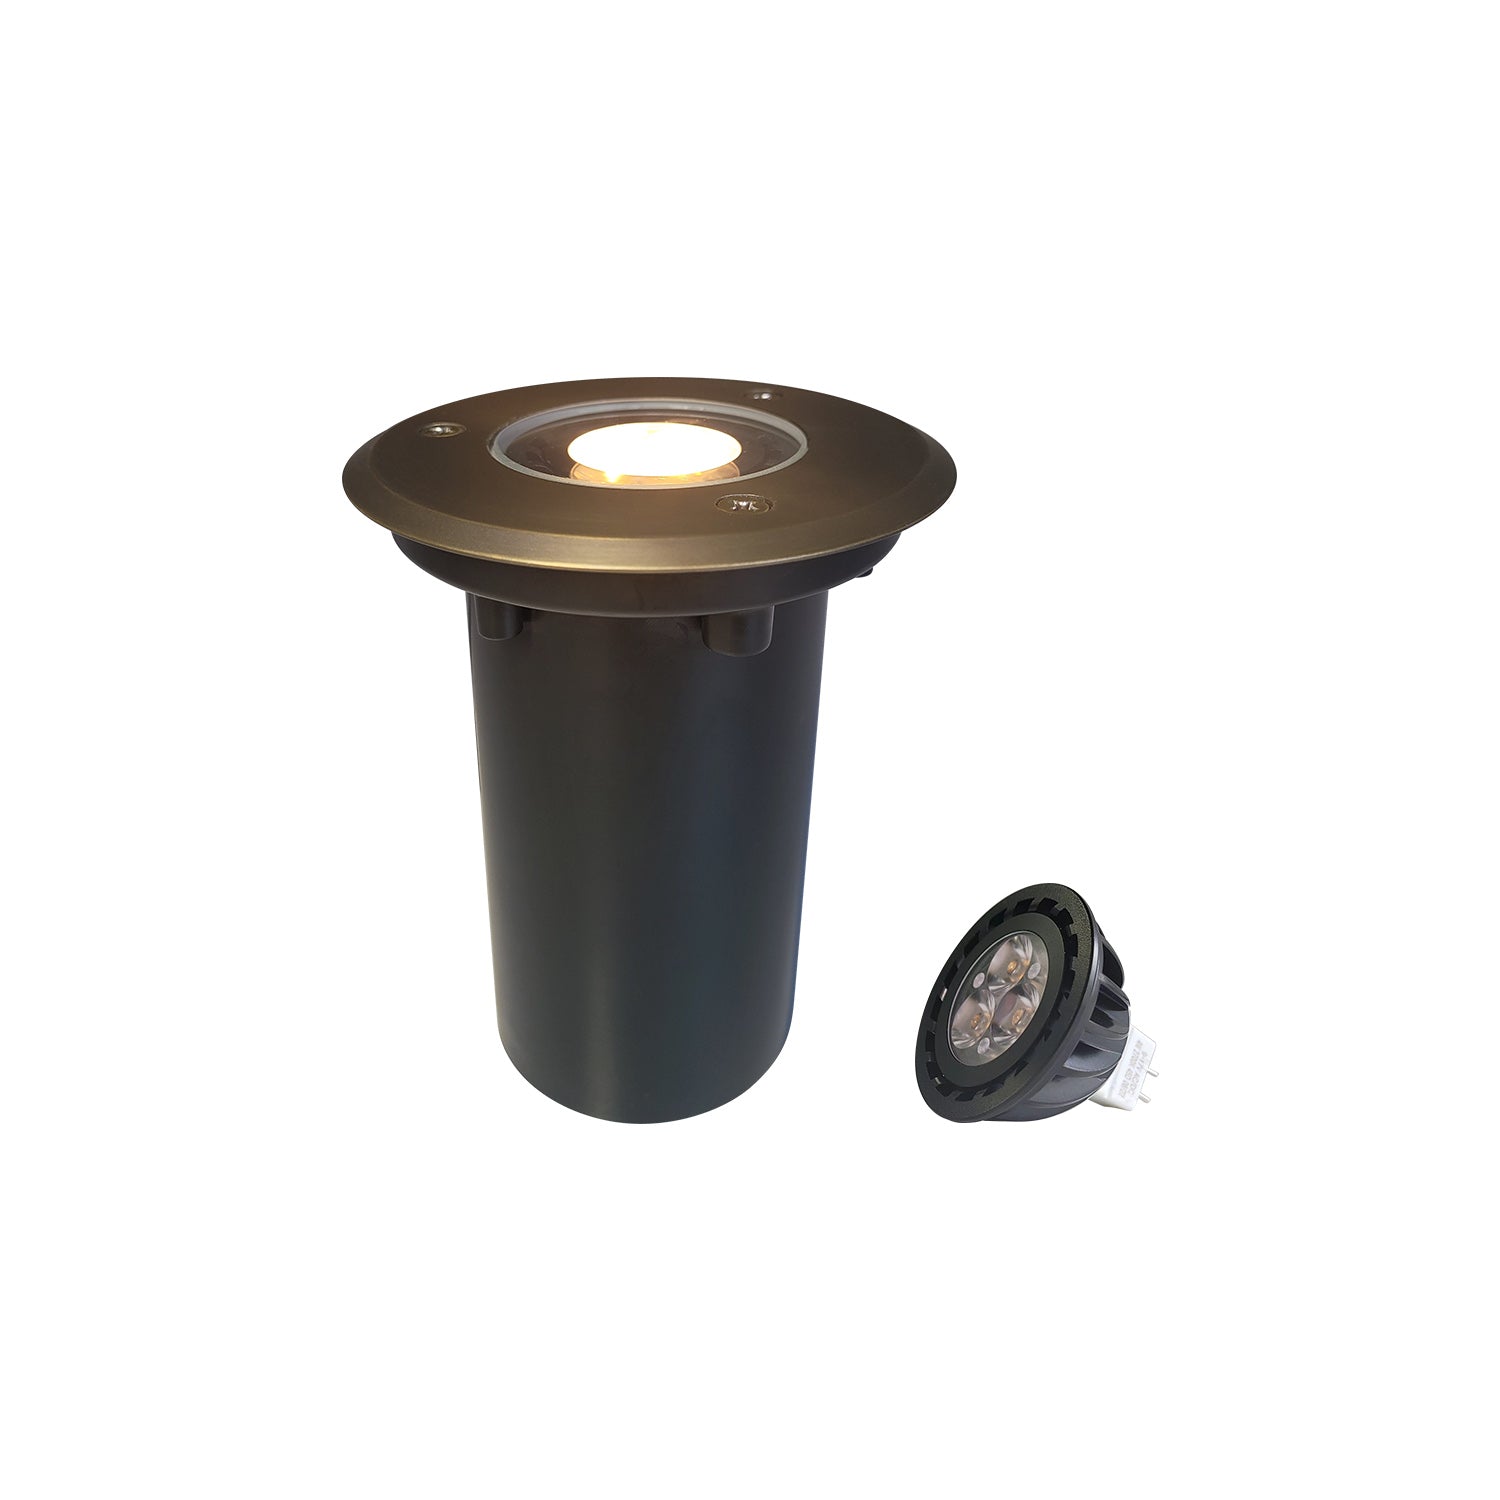 LED outdoor low voltage pathway lights COG303B with in-ground well light illuminated